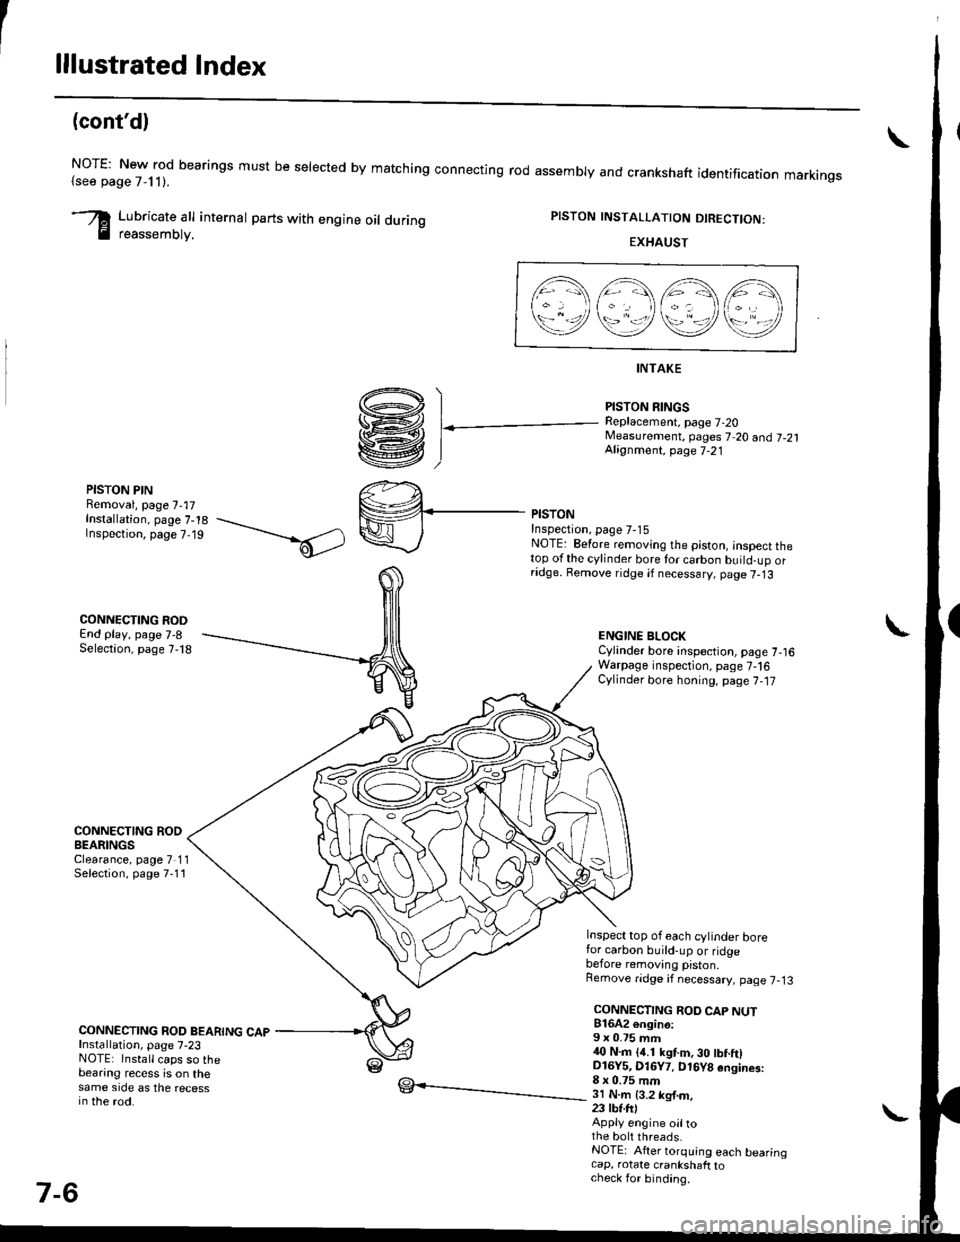 HONDA CIVIC 1999 6.G Owners Manual lllustrated Index
(contd)
NOTE: New rod bearings must be selected by matching connecting rod assembly and crankshaft(see page 7,11).identification markings
Lubricate all internal parts with engine oi